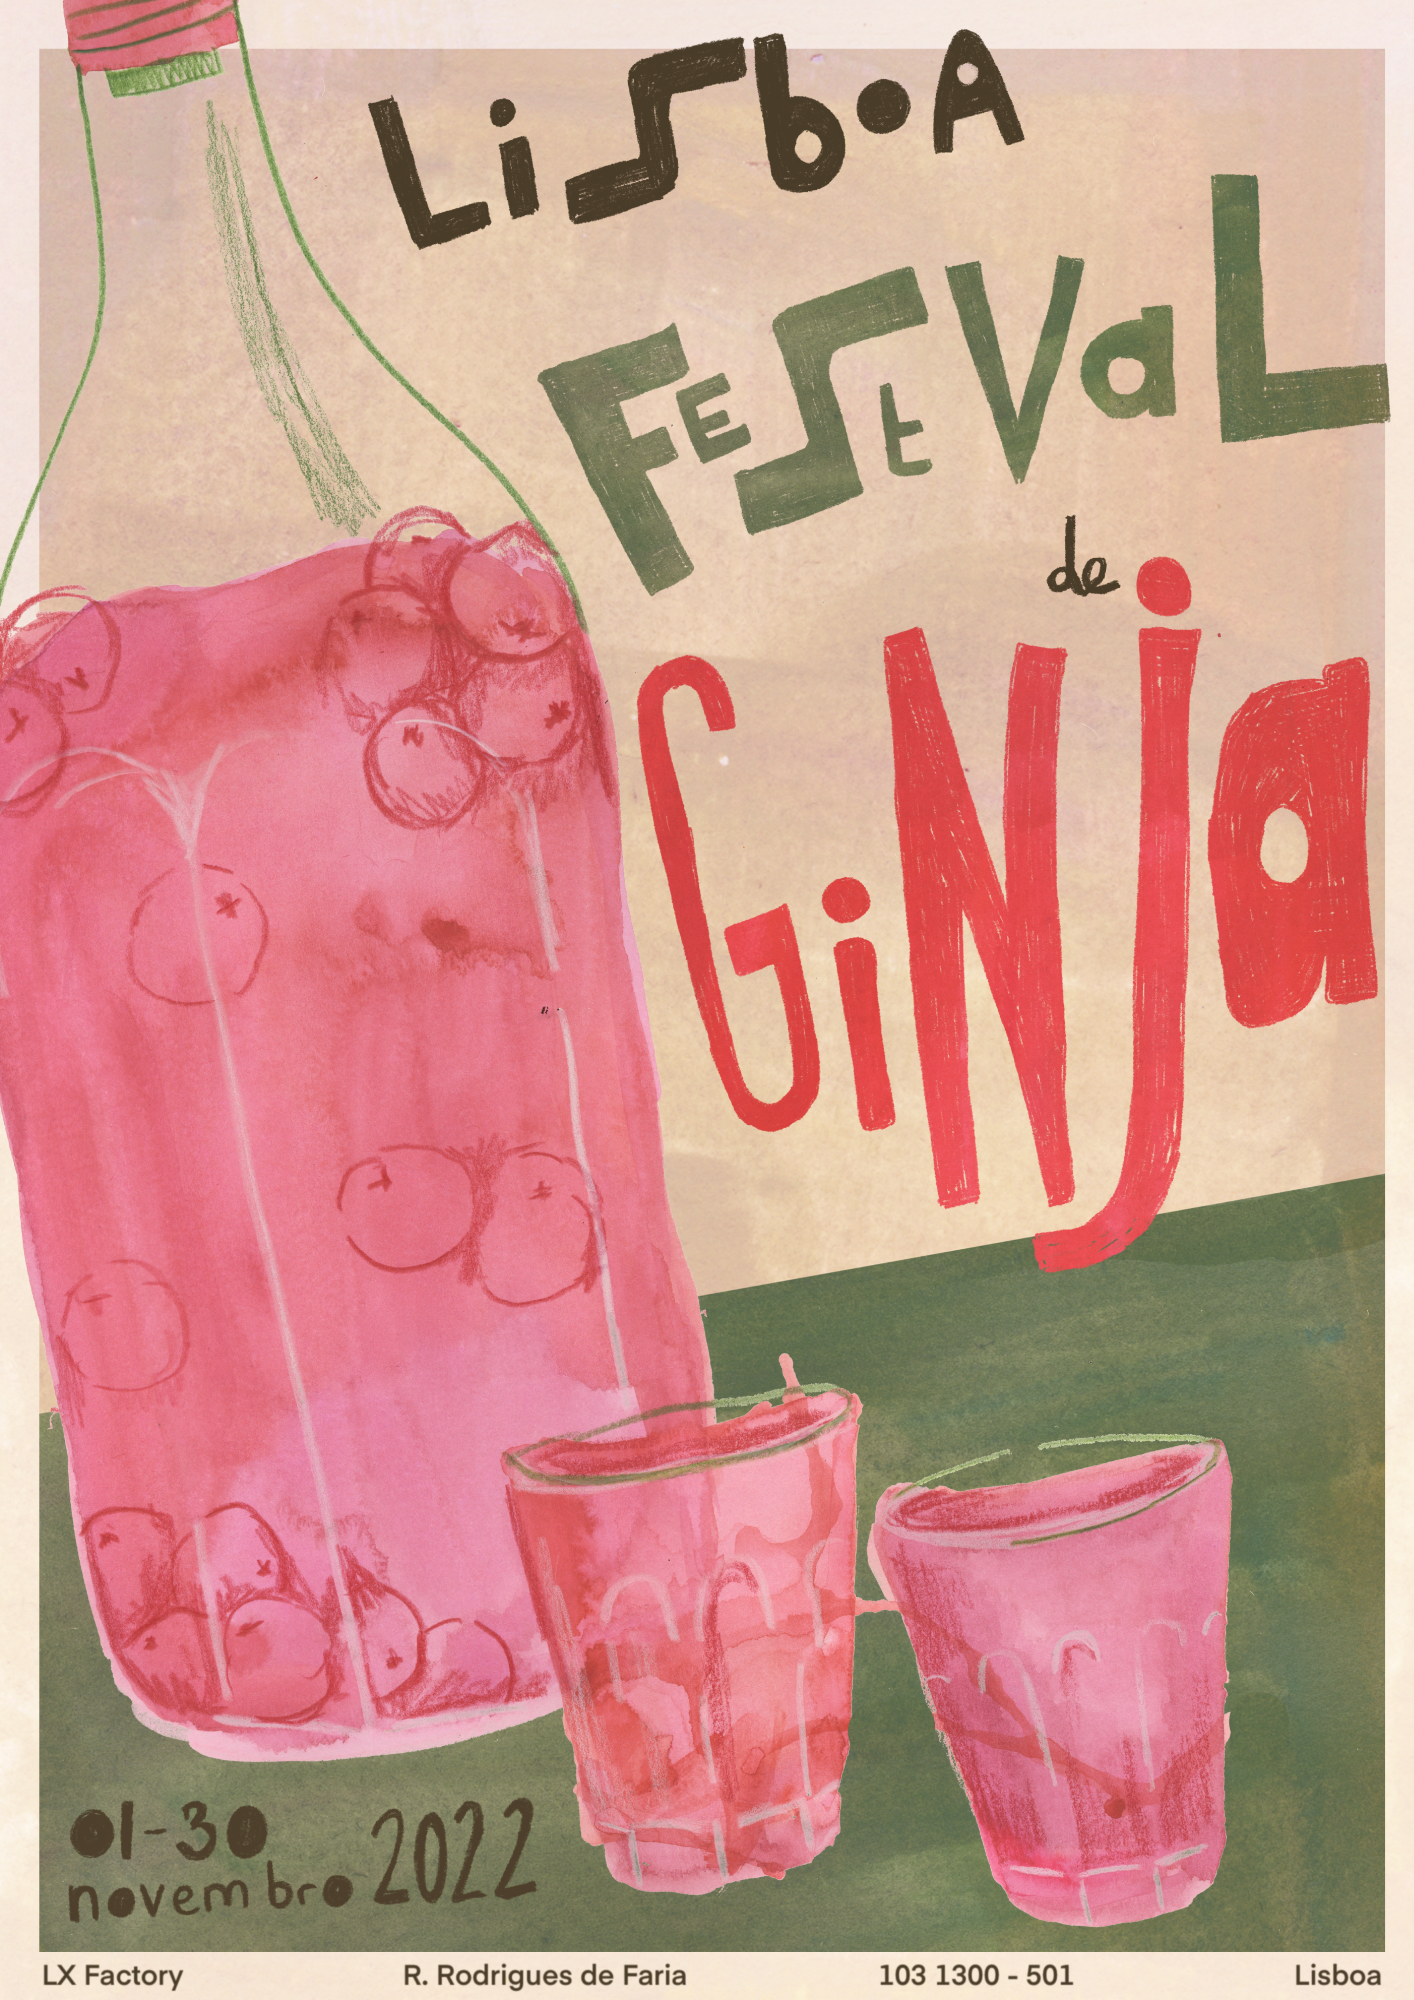 Festival de Ginja. One of a series of posters I designed to promote a Festival of Ginja in Lisbon. Ginja is a cherry liqueur that originated in Portugal.